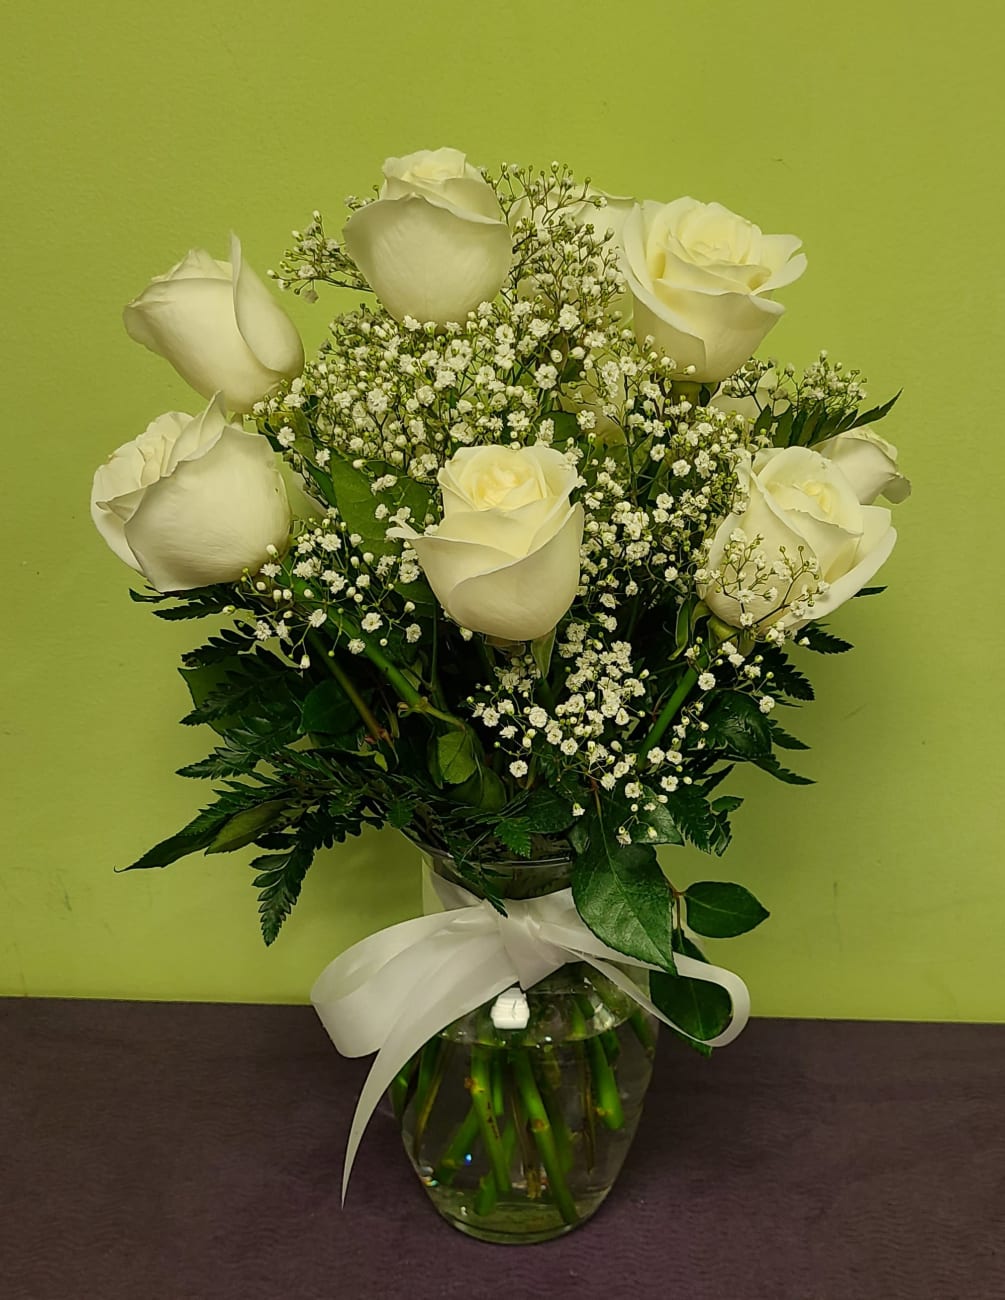 This simple, stunning, and elegant arrangement includes 12 pure white Roses arranged